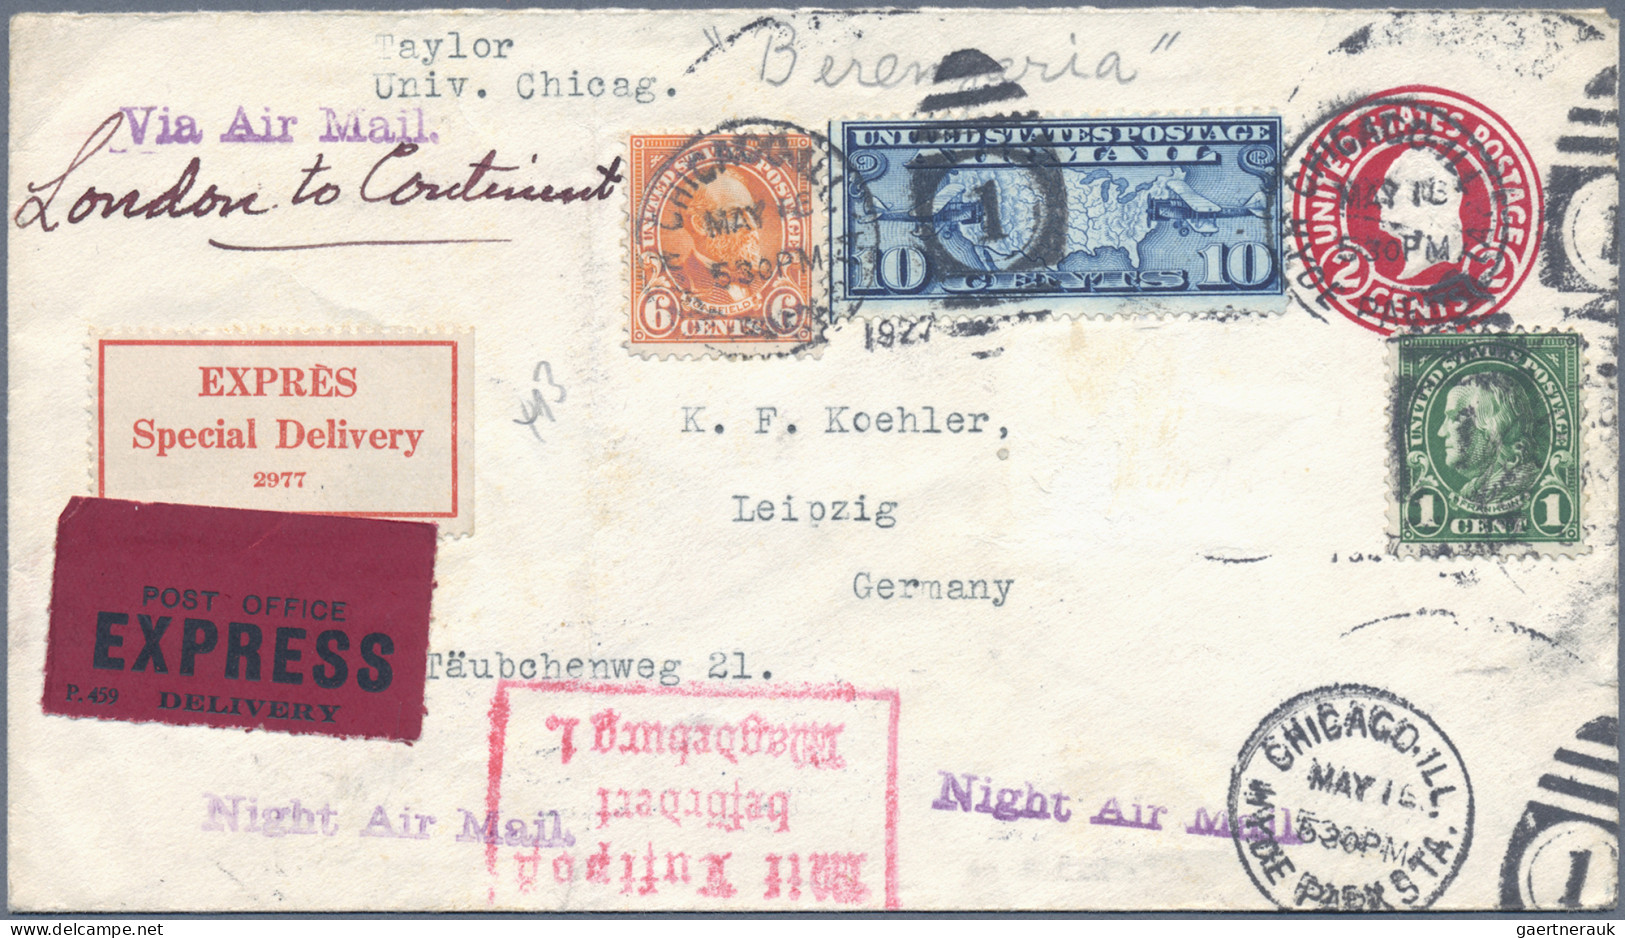 Airmail - Overseas: 1926/1988, assortment of apprx. 164 airmail covers/cards, go